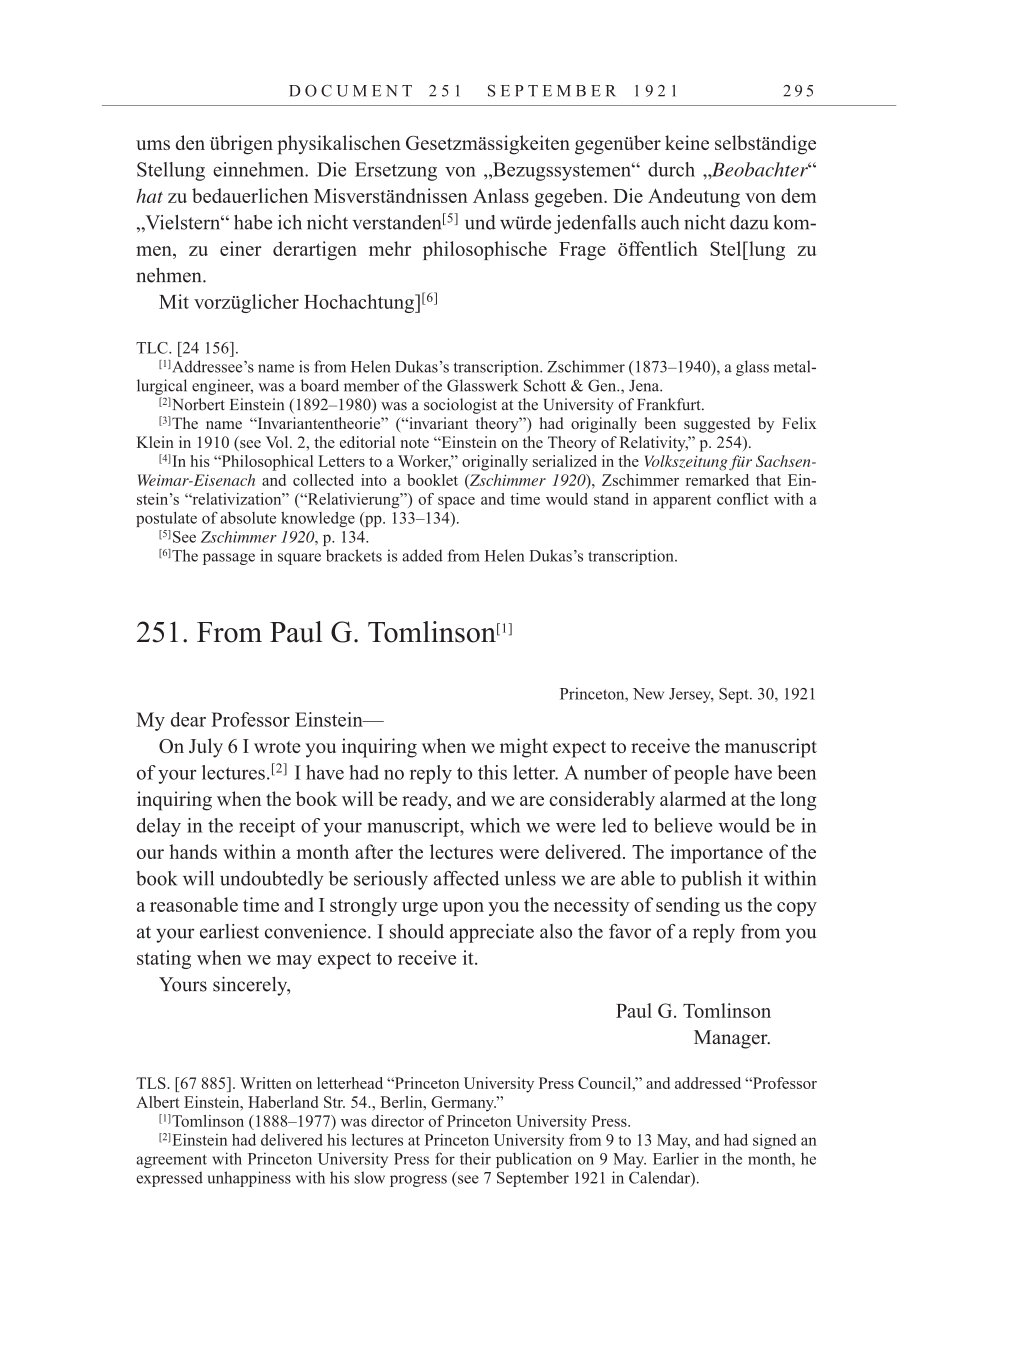 Volume 12: The Berlin Years: Correspondence January-December 1921 page 295